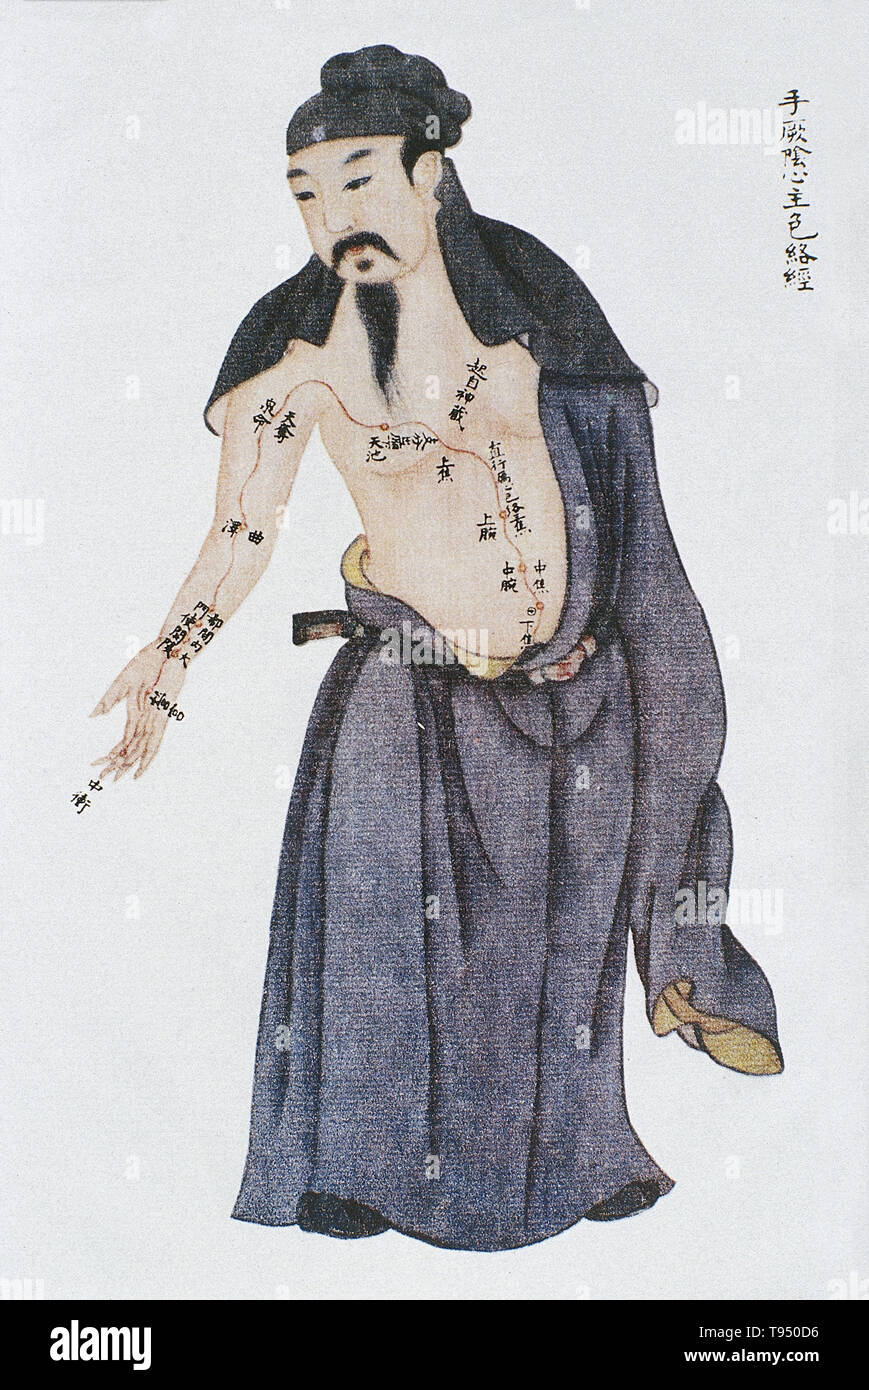 Illustration showing the pericardium (xinbao, lit. Heart Envelope) channel of arm jueyin from Renti jingmai tu (Illustrations of the Channels of the Human Body), a manuscript text executed during the Kangxi reign period of the Qing dynasty (1662-1722). Acupuncture is a form of alternative medicine in which thin needles are inserted into the body. It is a key component of traditional Chinese medicine (TCM). Stock Photo